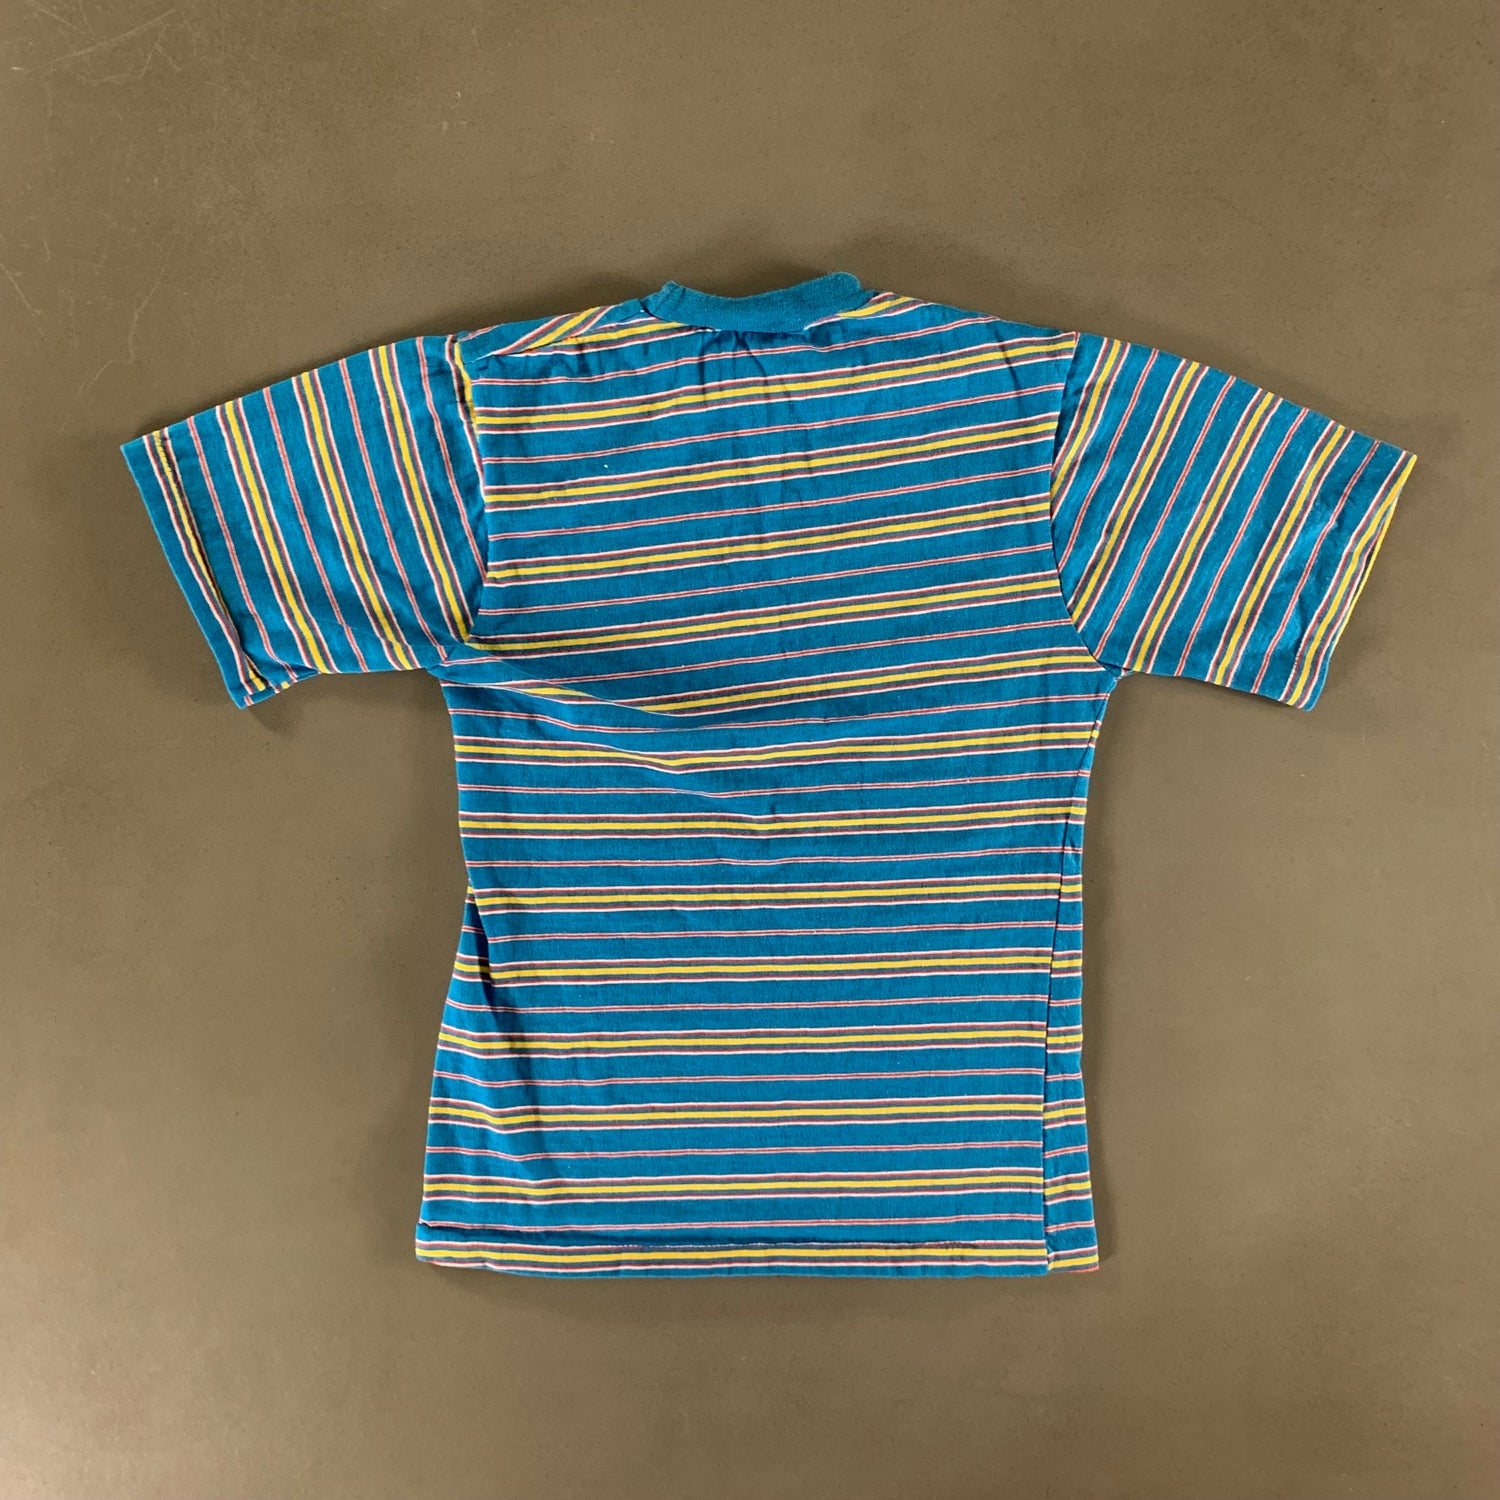 Vintage 1970s Striped T-shirt size Small